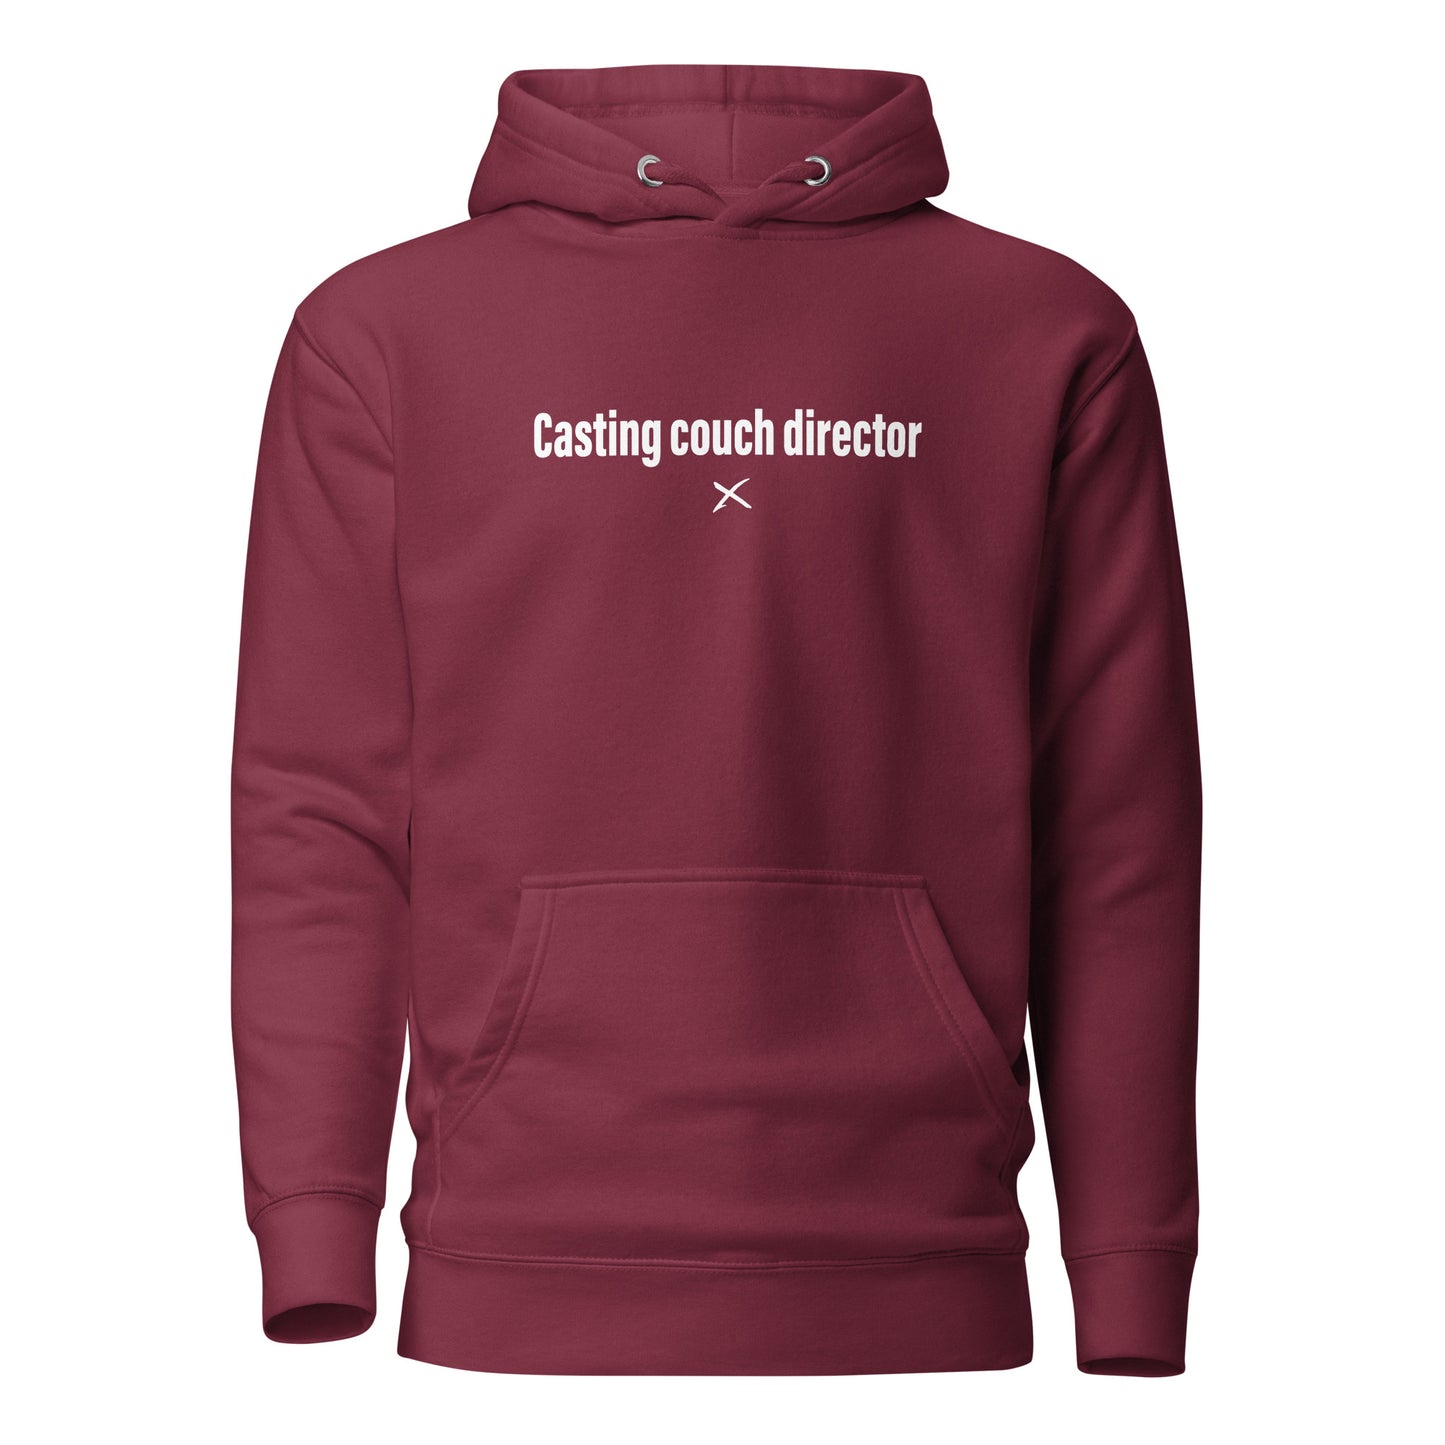 Casting couch director - Hoodie